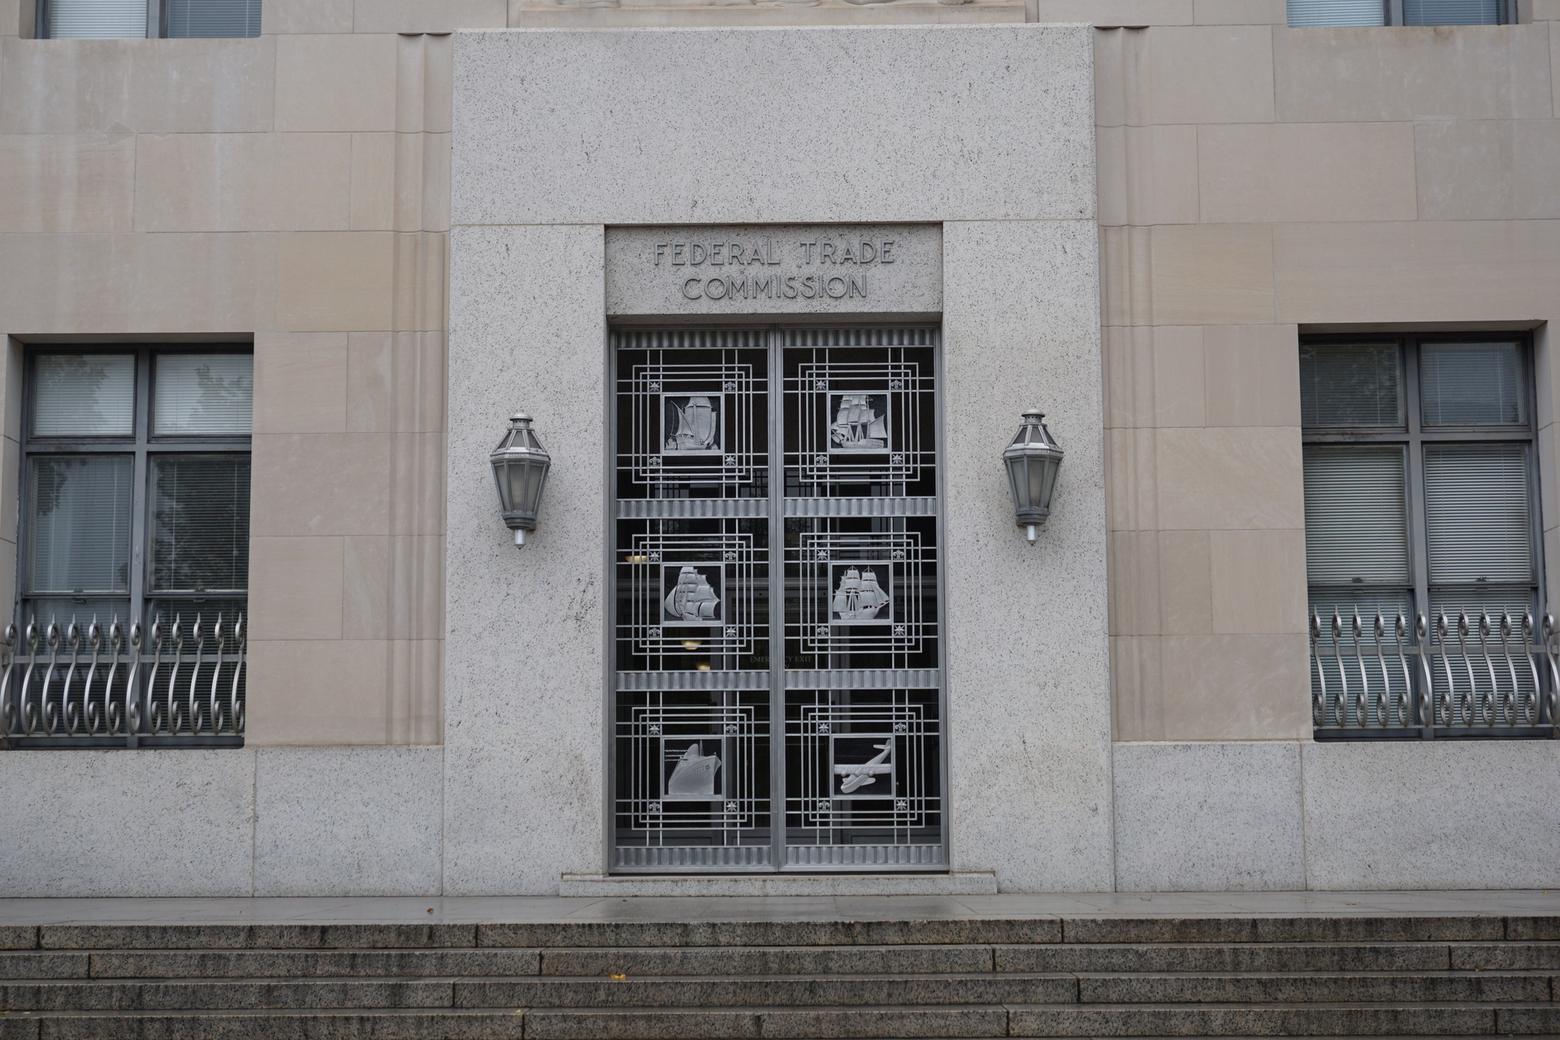 The Federal Trade Commission building entrance